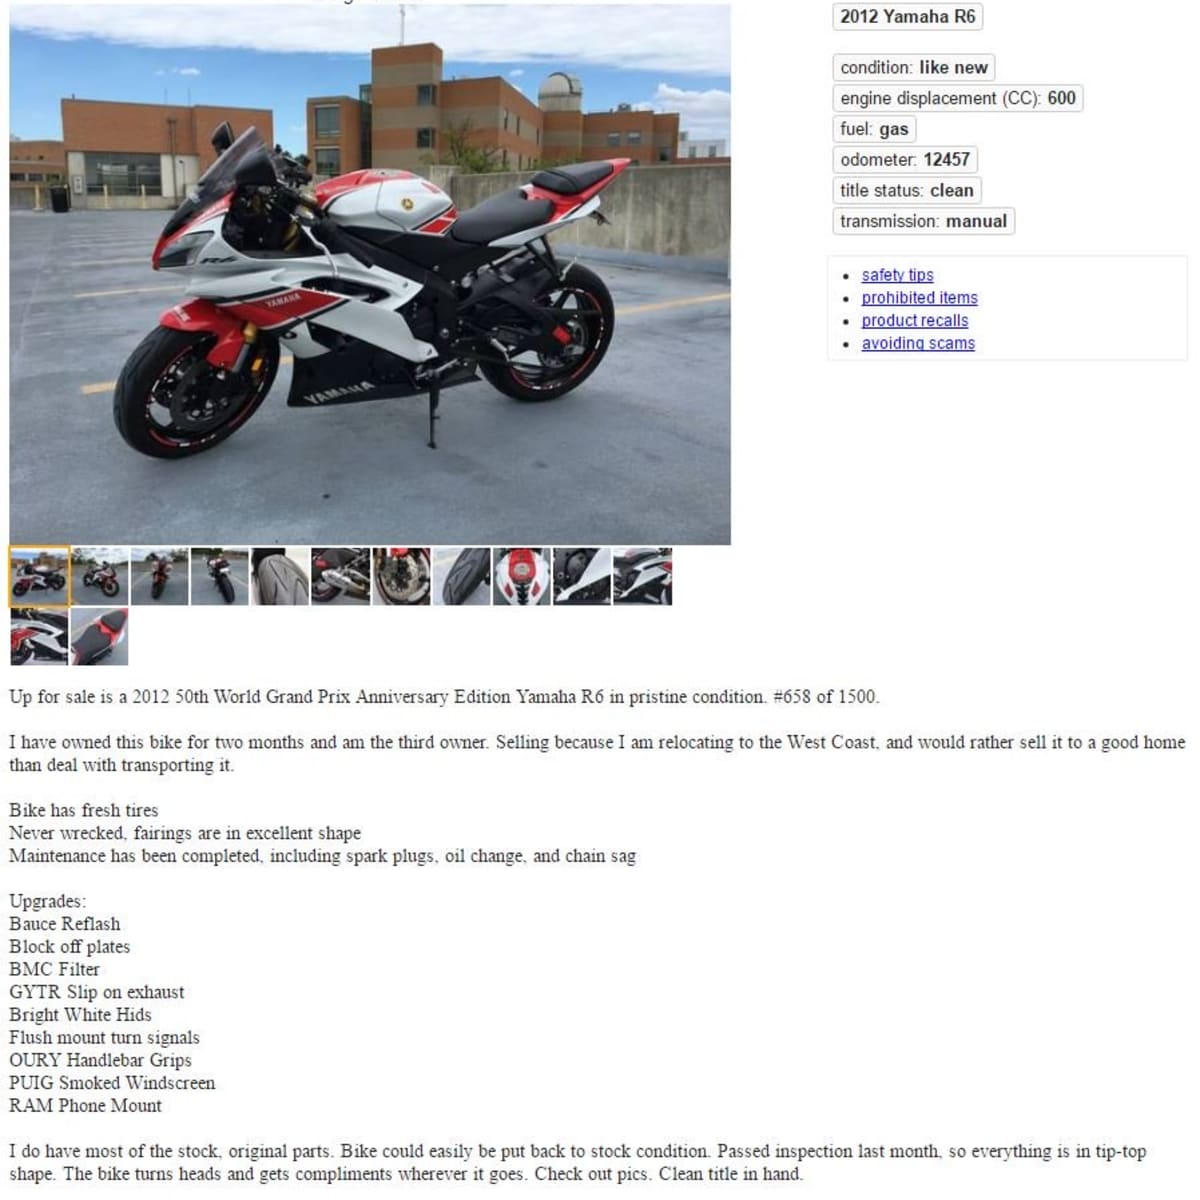 How To Buy A Motorcycle On Craigslist Axleaddict A Community Of Car Lovers Enthusiasts And Mechanics Sharing Our Auto Advice